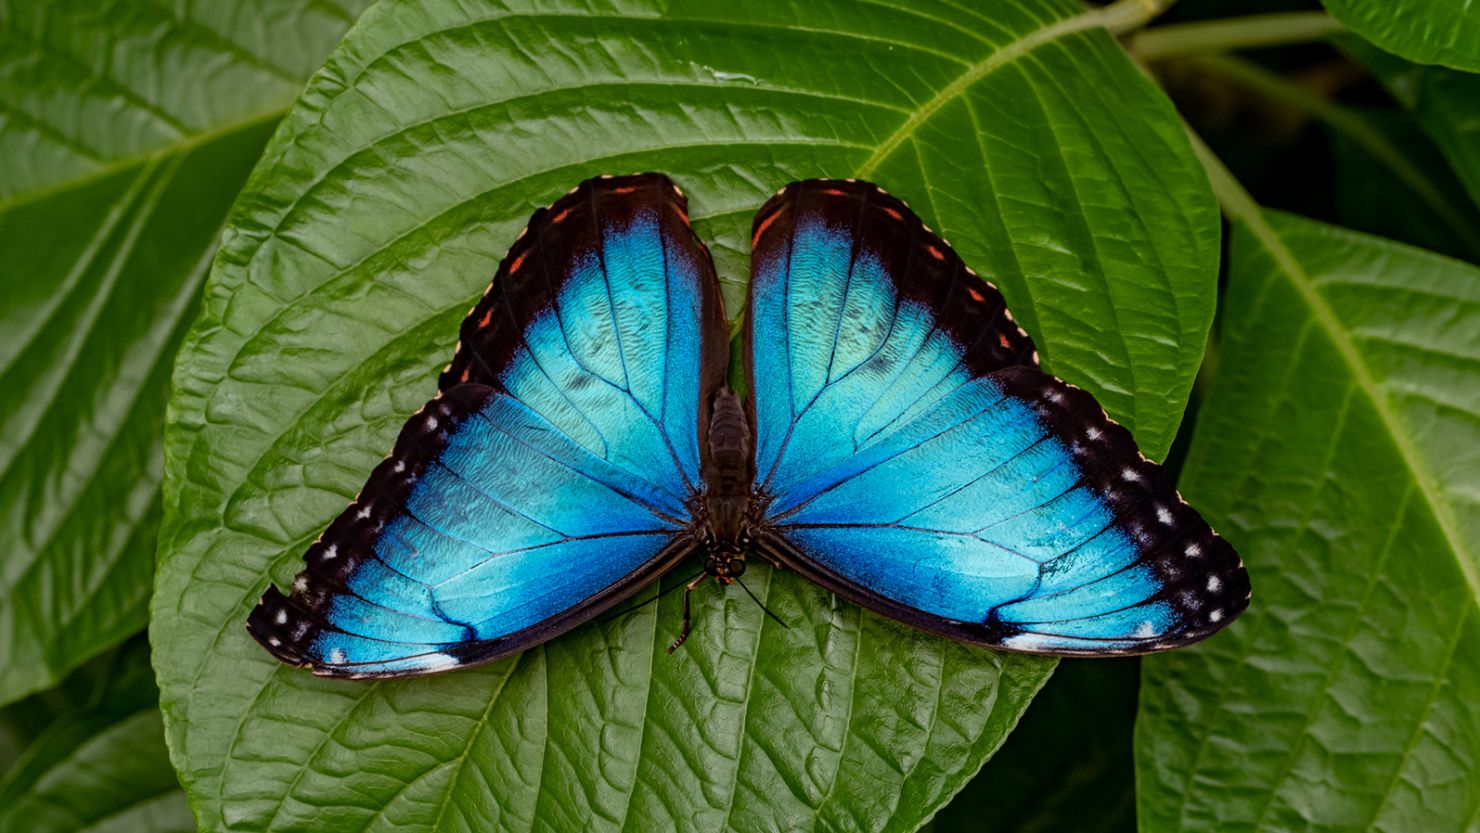 Fossils reveal butterfly 'tree of life' and origins